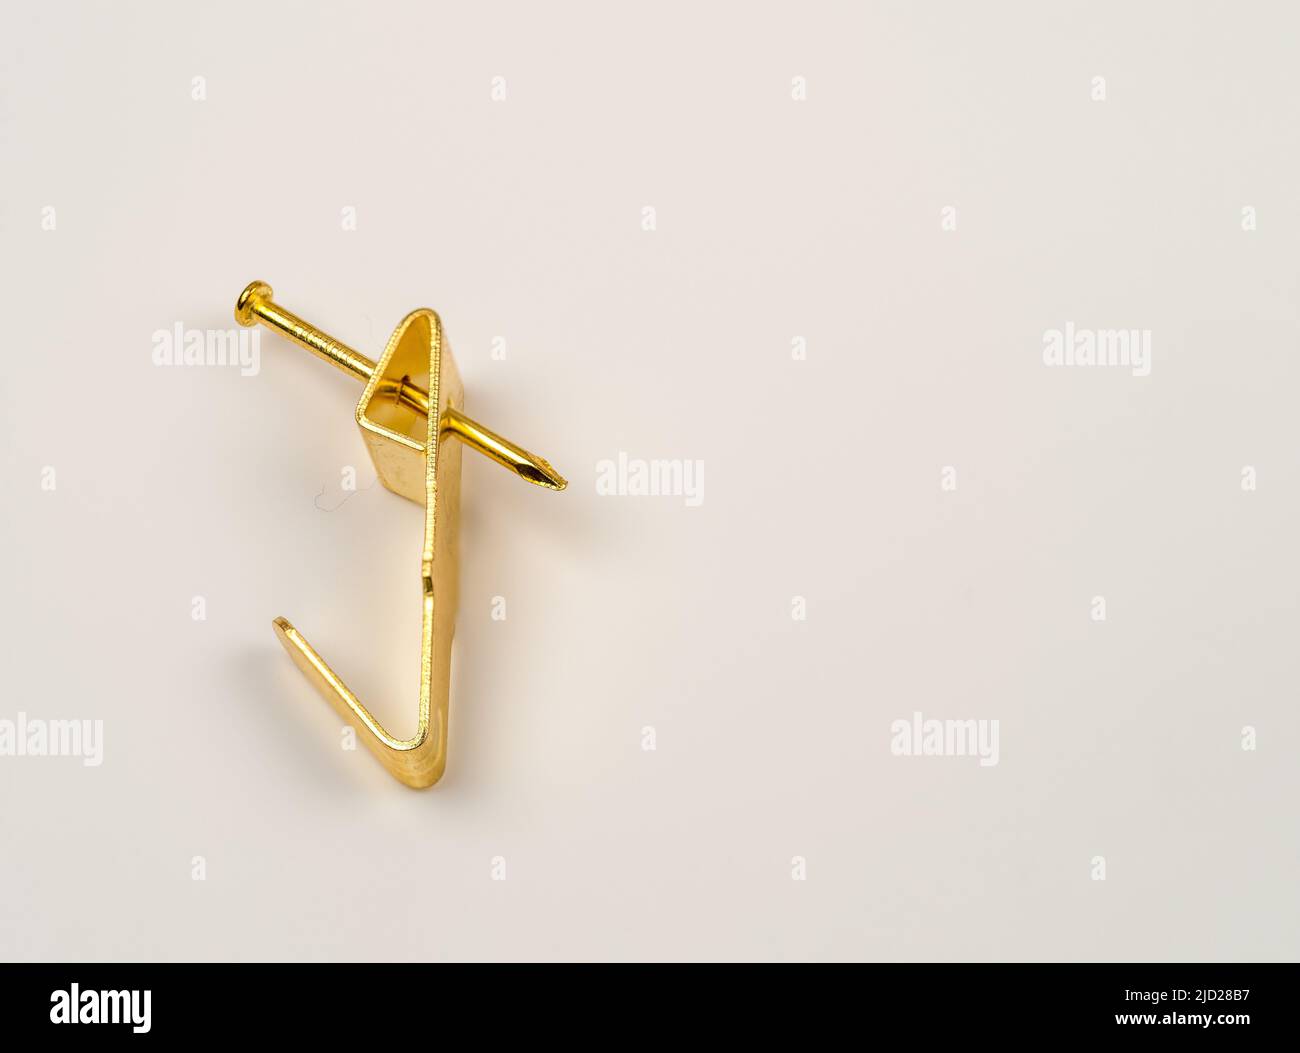 close up flat lay image of a single fixing single hook brass  metal wall mounted picture hook Stock Photo